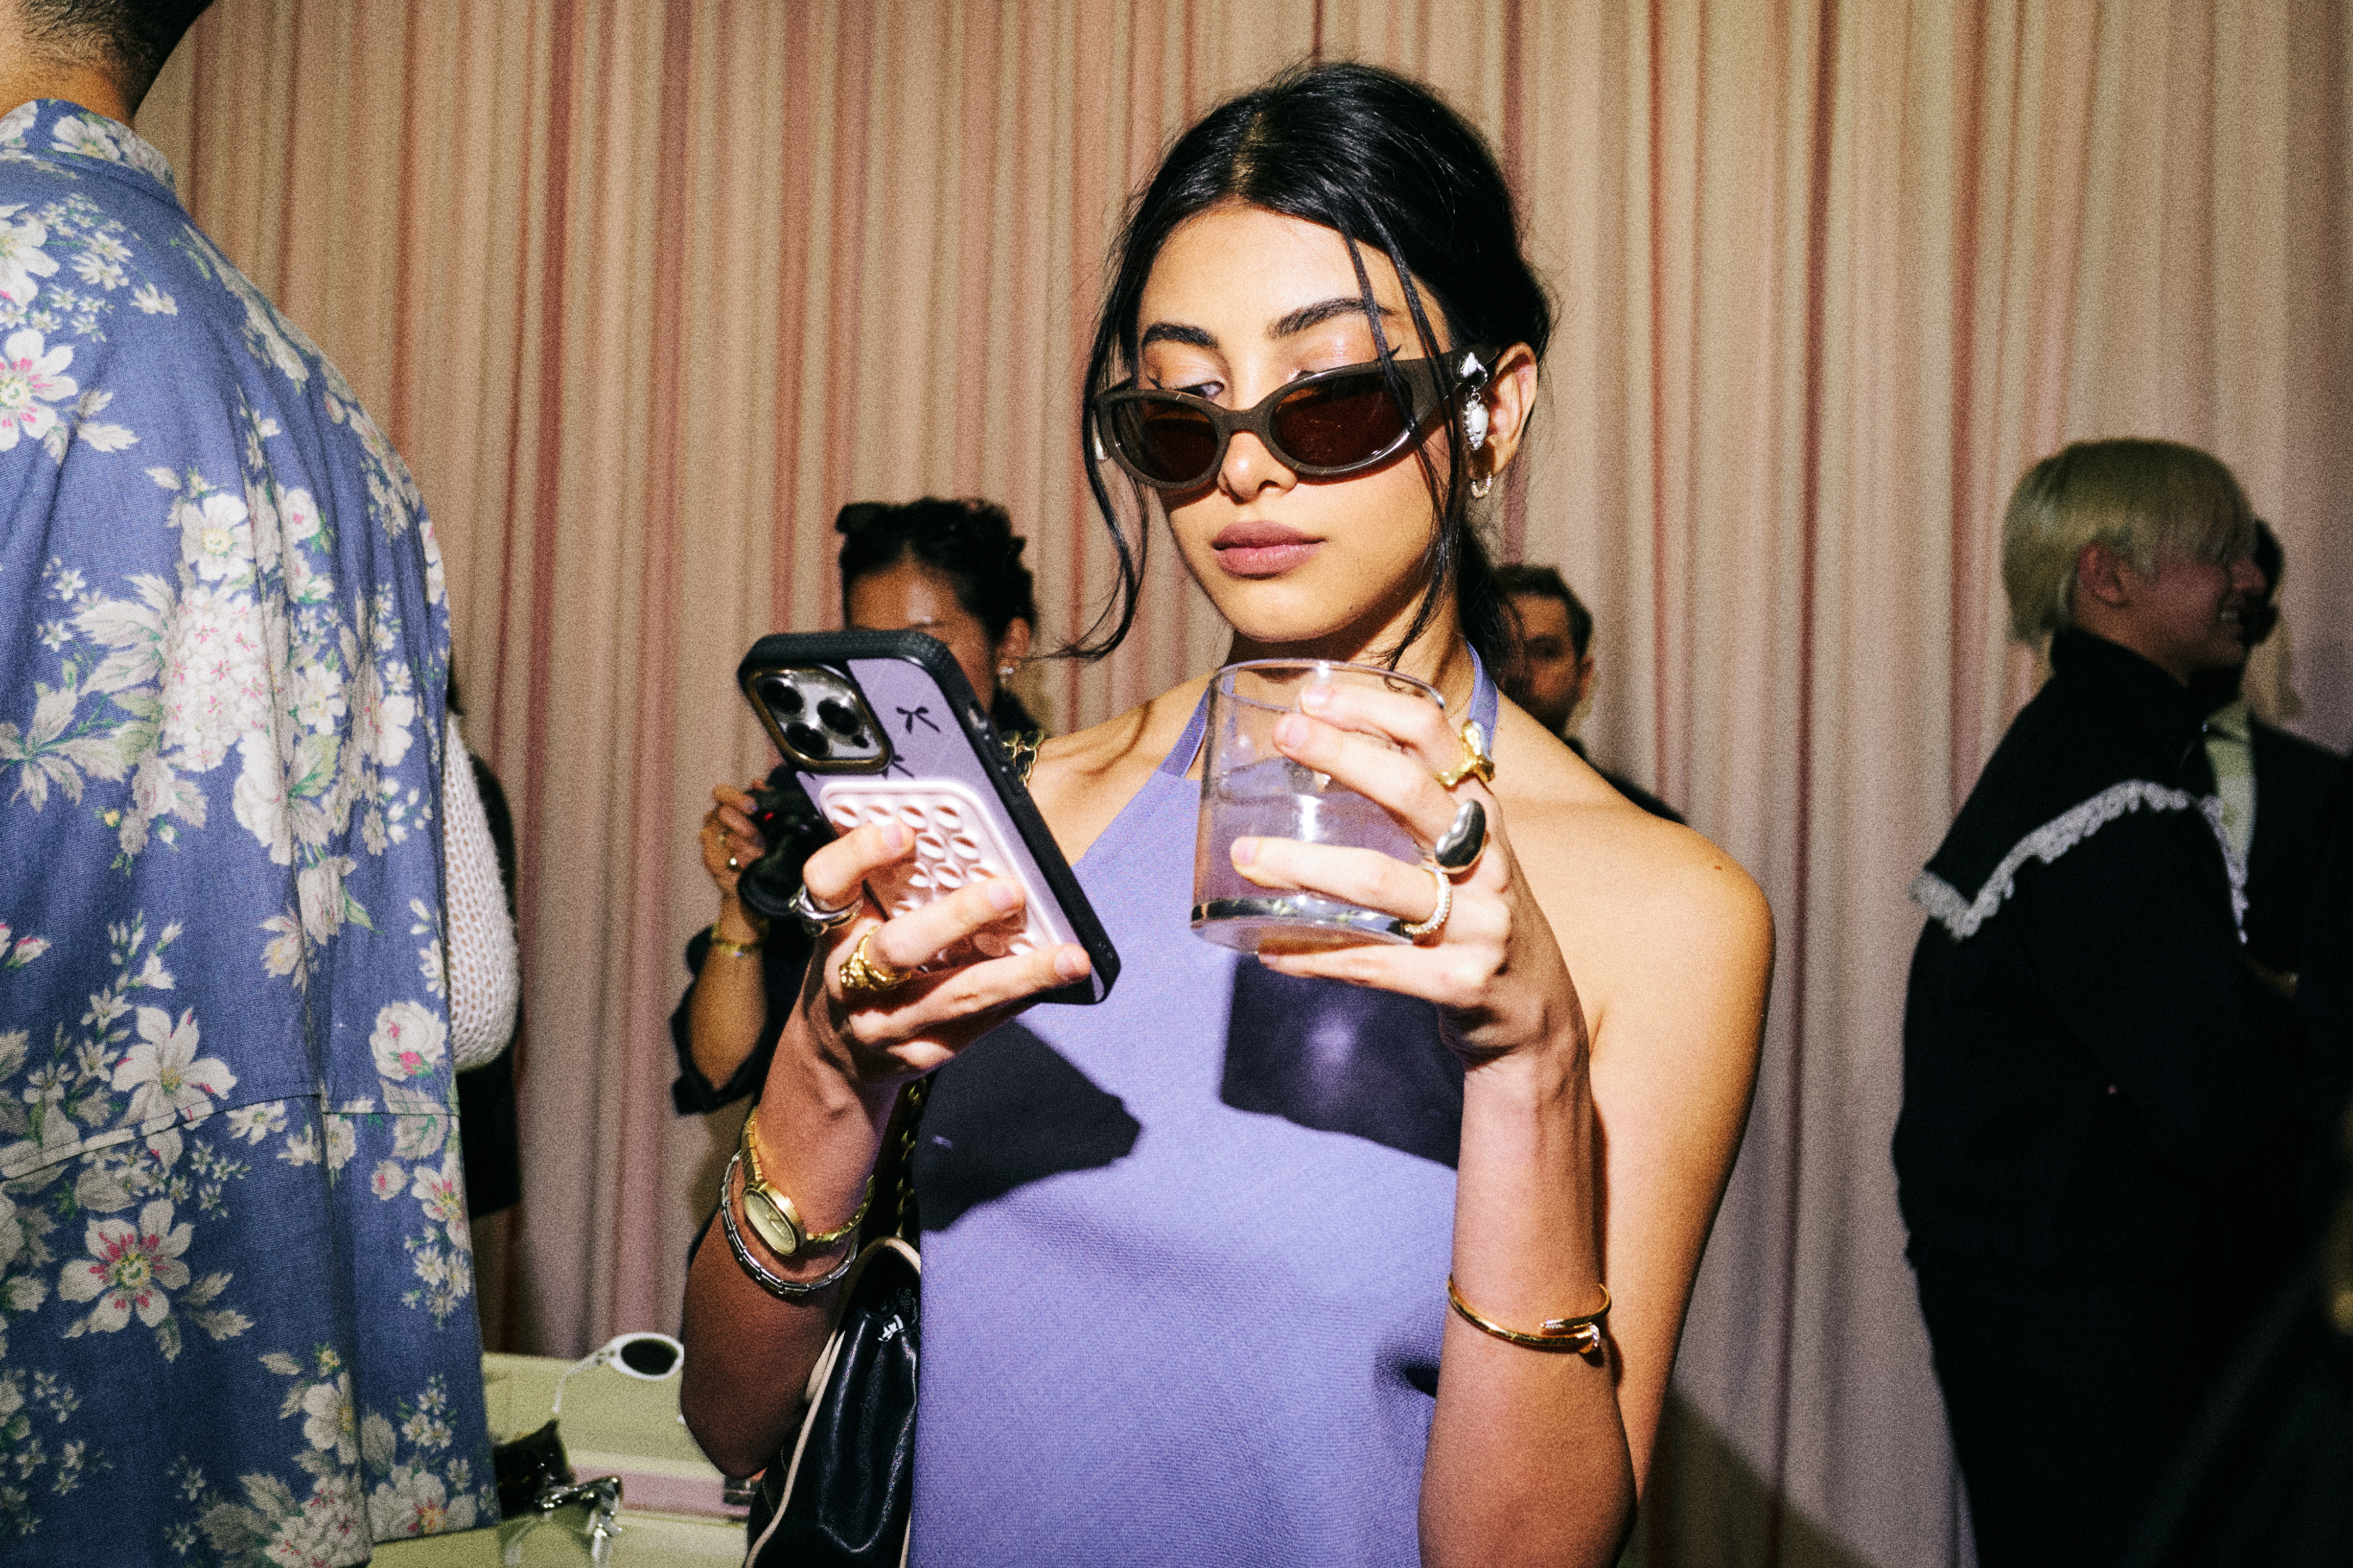 Person in a sleeveless top with sunglasses holding a phone and a drink at a social event